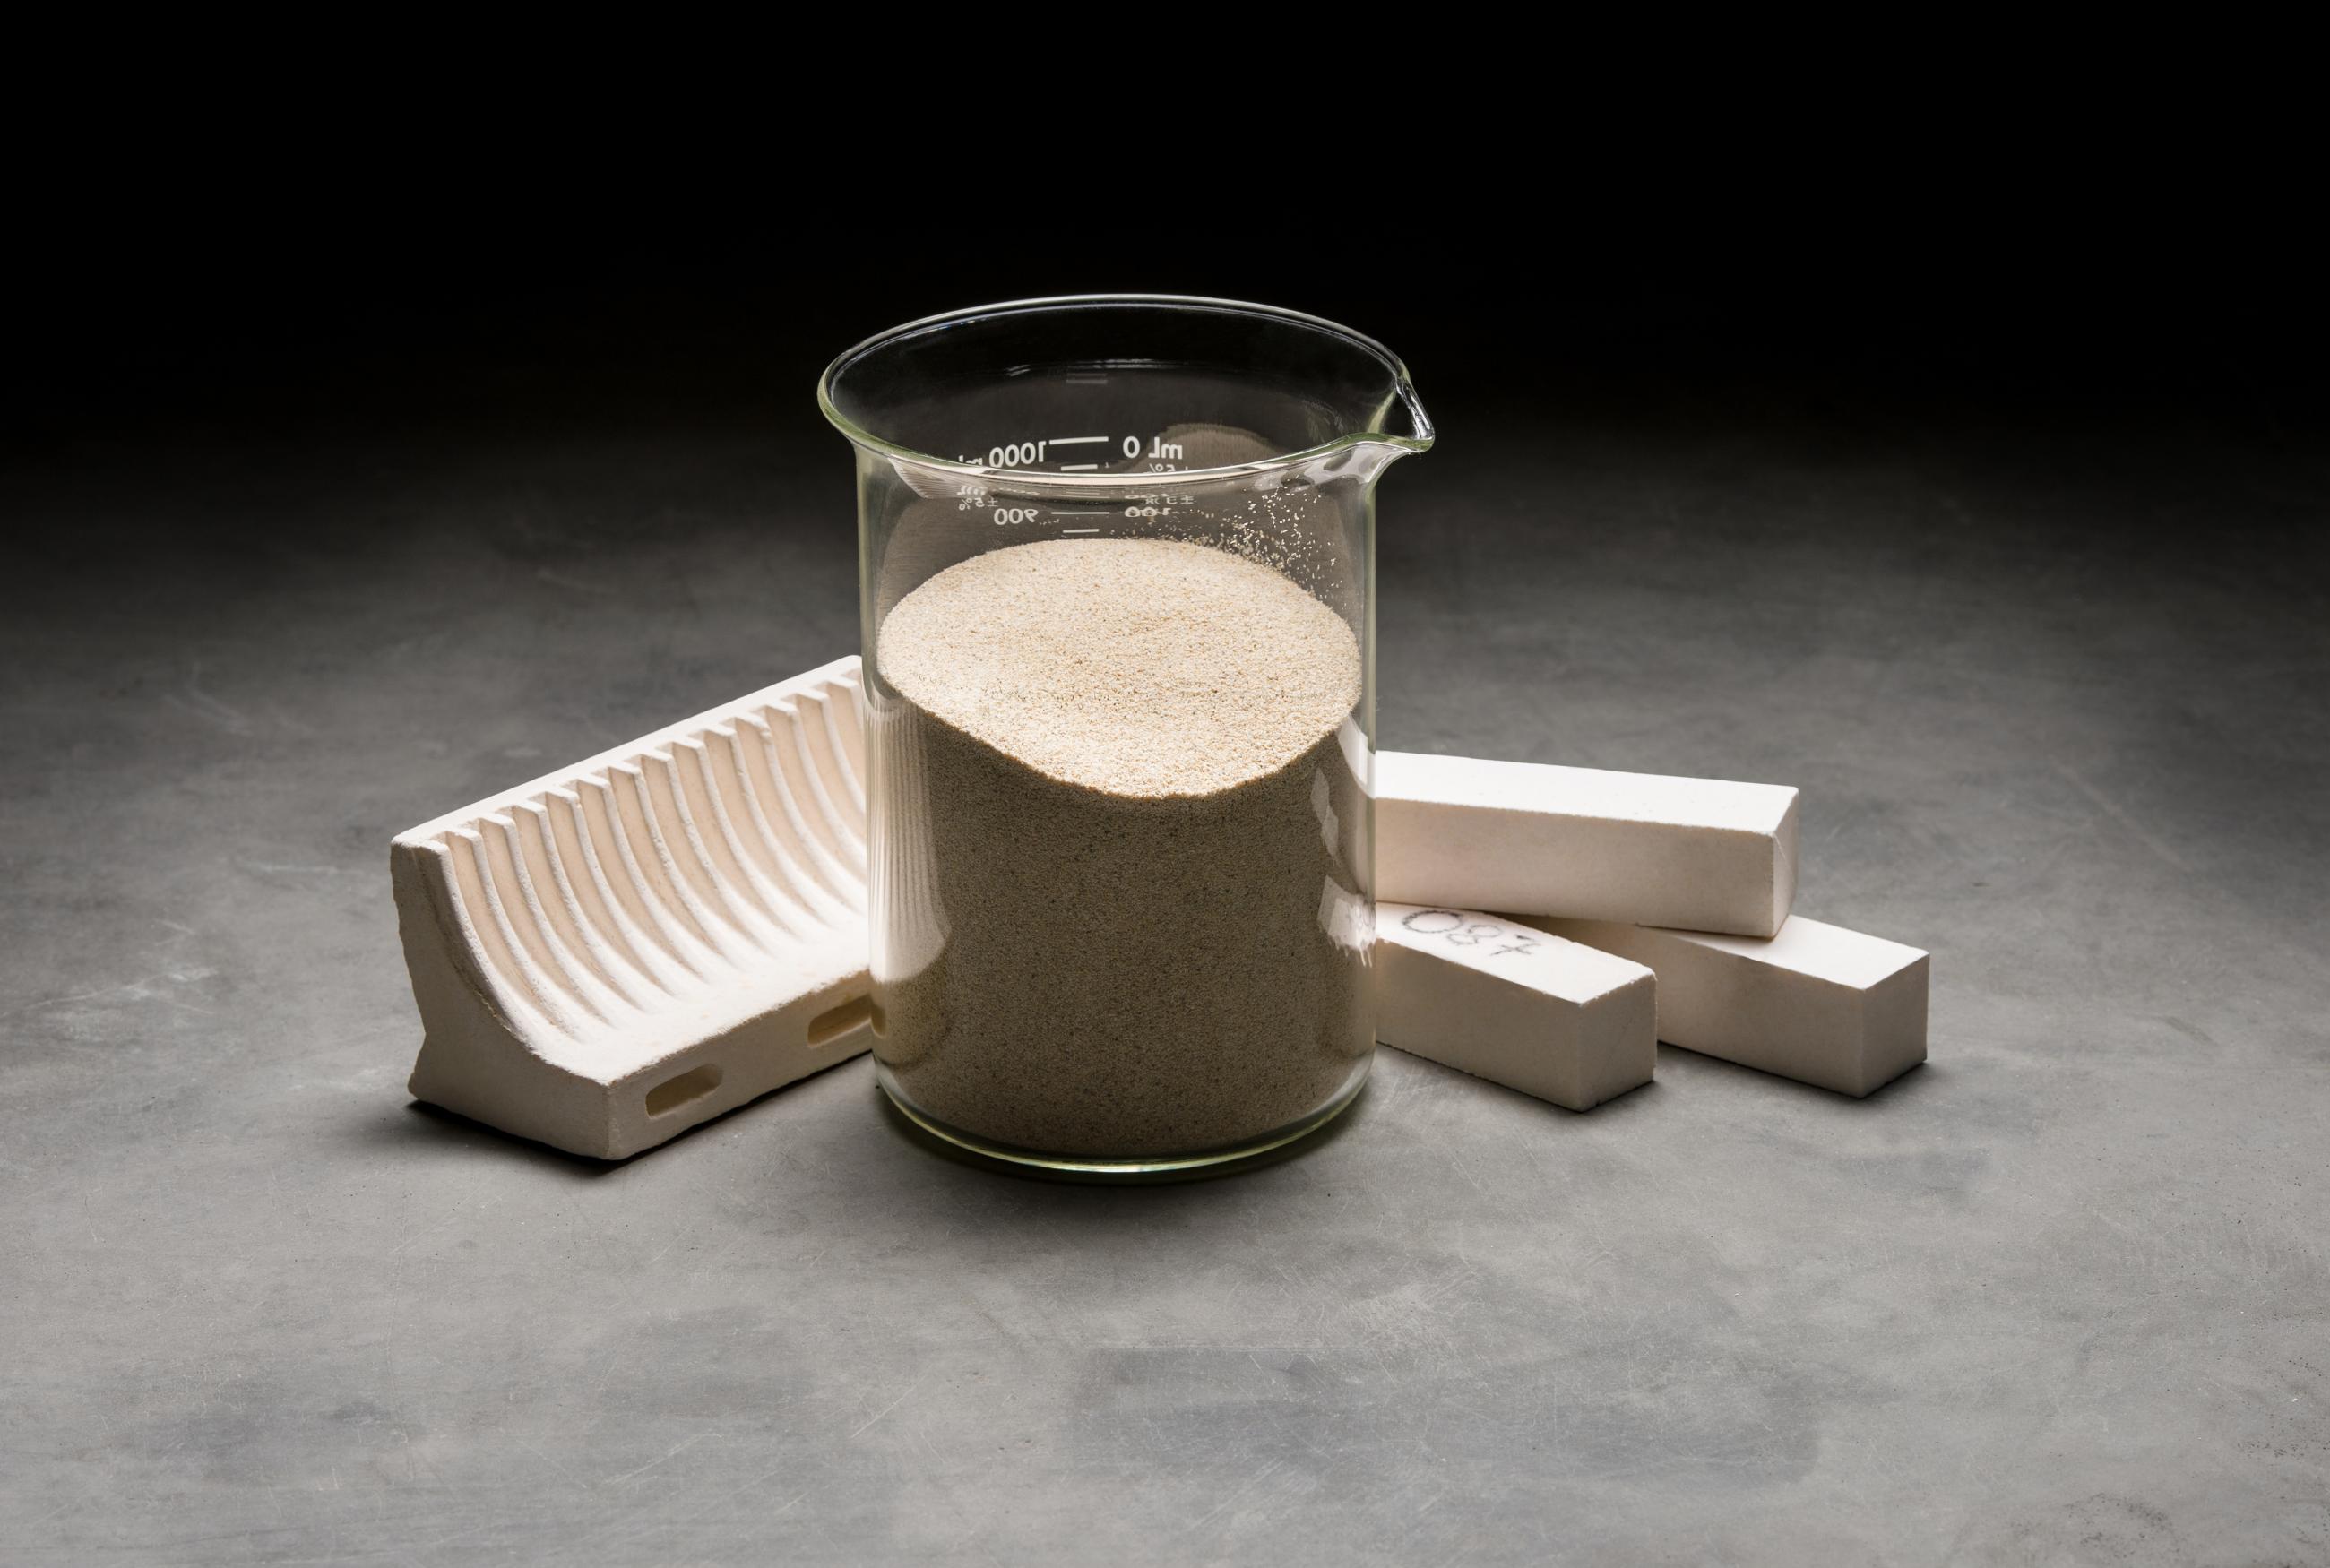 Product photography showcasing the cordierite material in a glass beaker